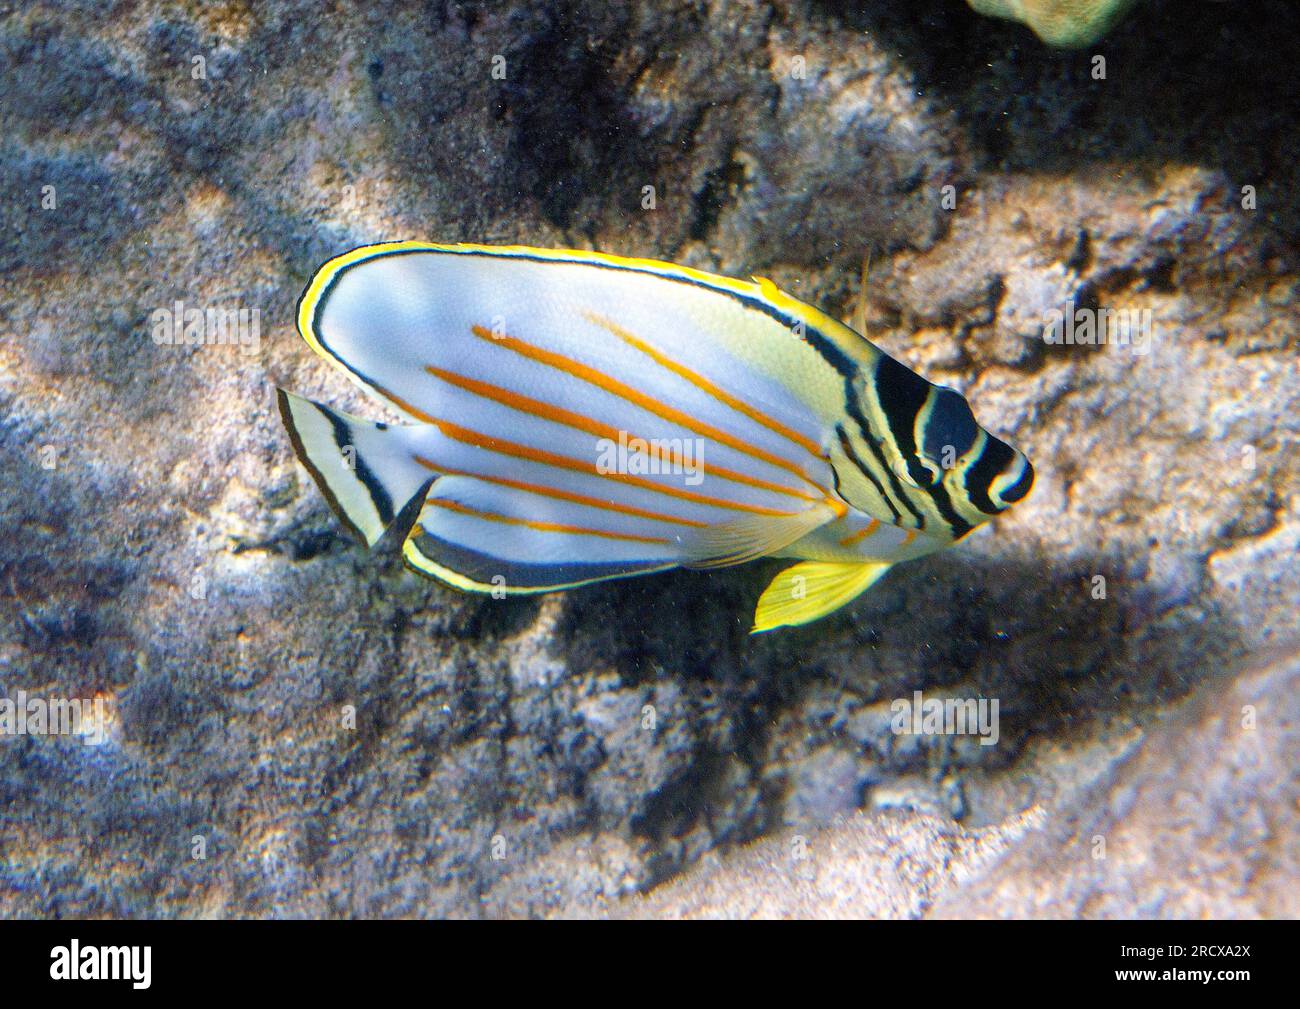 Ornate butterflyfish (Chaetodon ornatissimus), swimming in the biotope, side view, USA, Hawaii, Maui Stock Photo